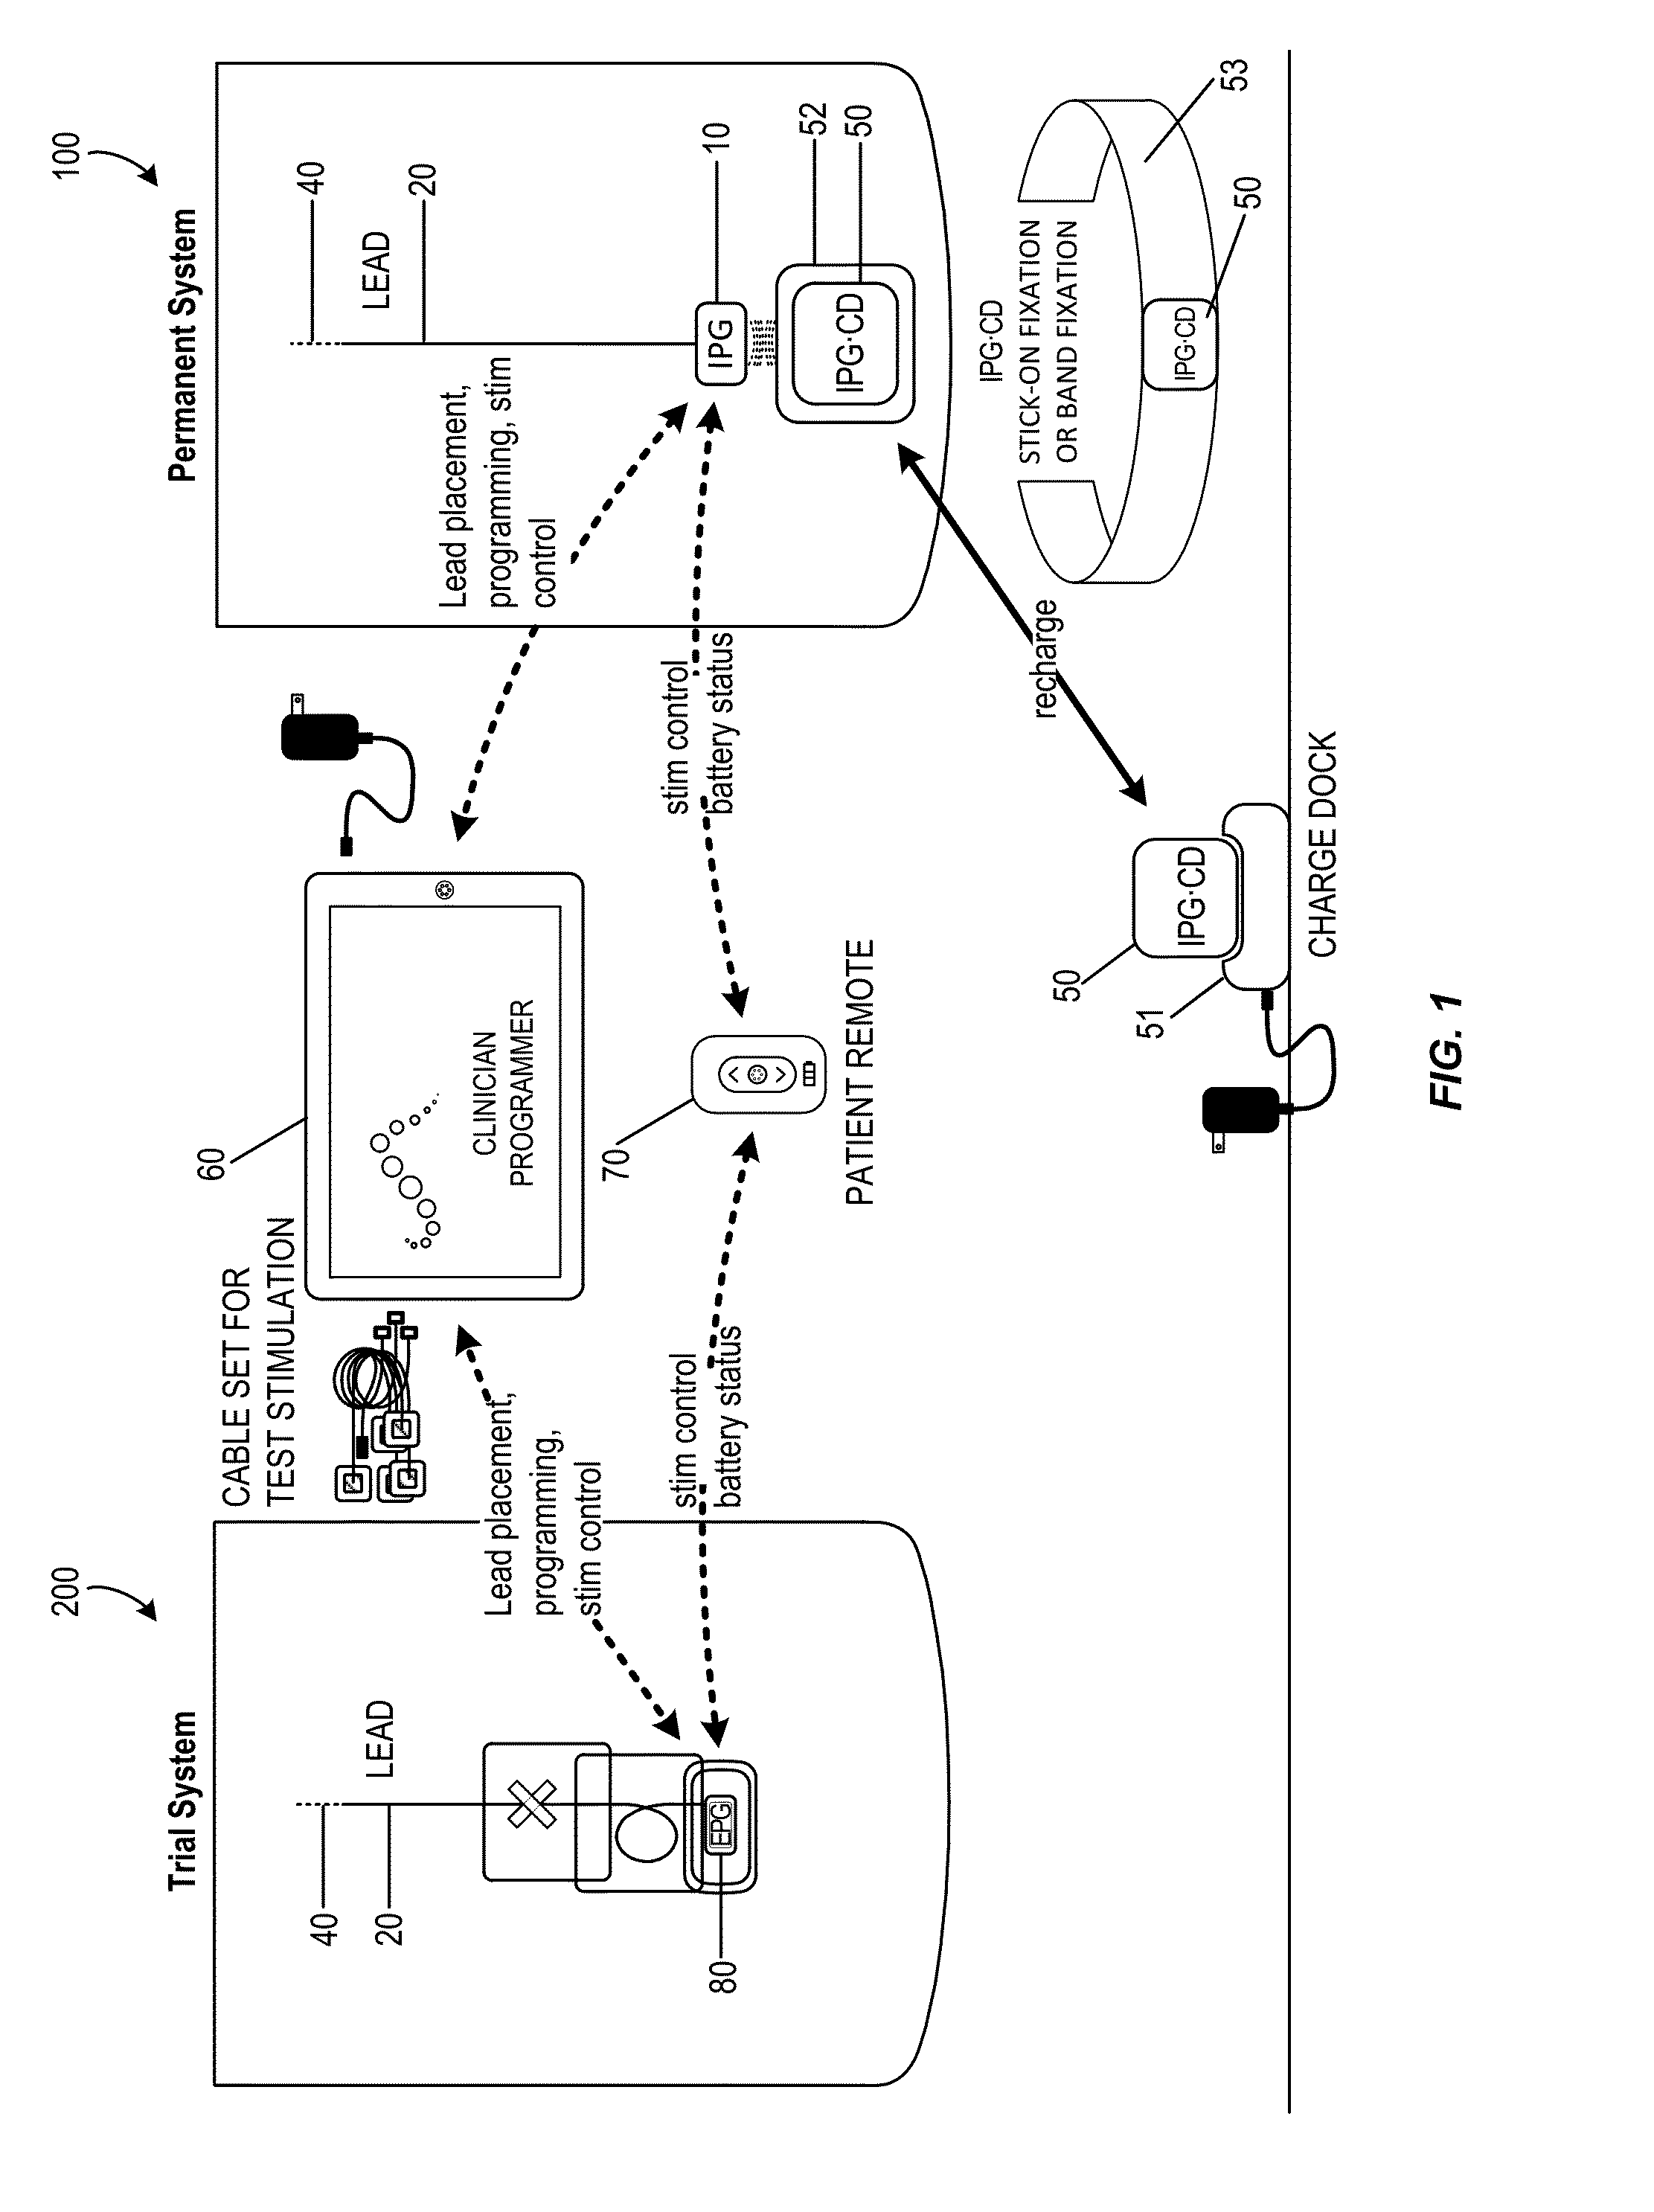 Integrated Electromyographic Clinician Programmer for Use with an Implantable Neurostimulator